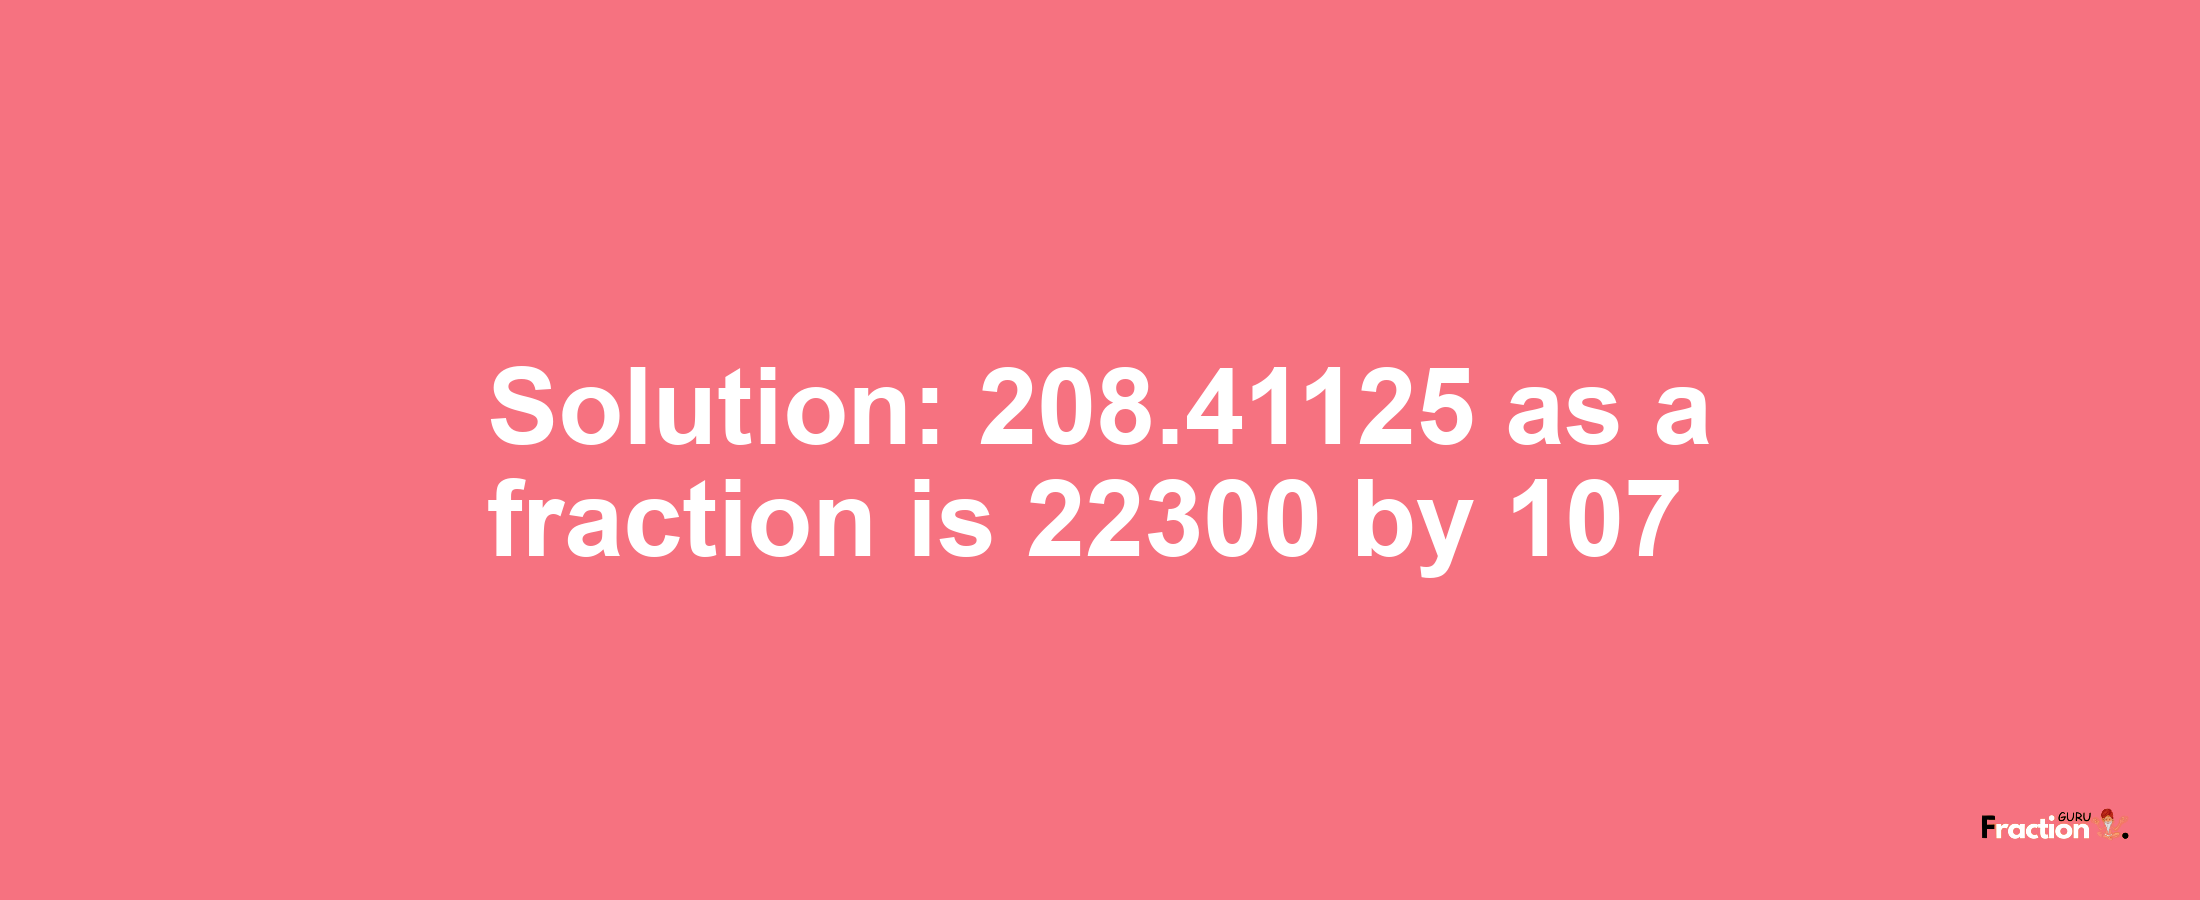 Solution:208.41125 as a fraction is 22300/107